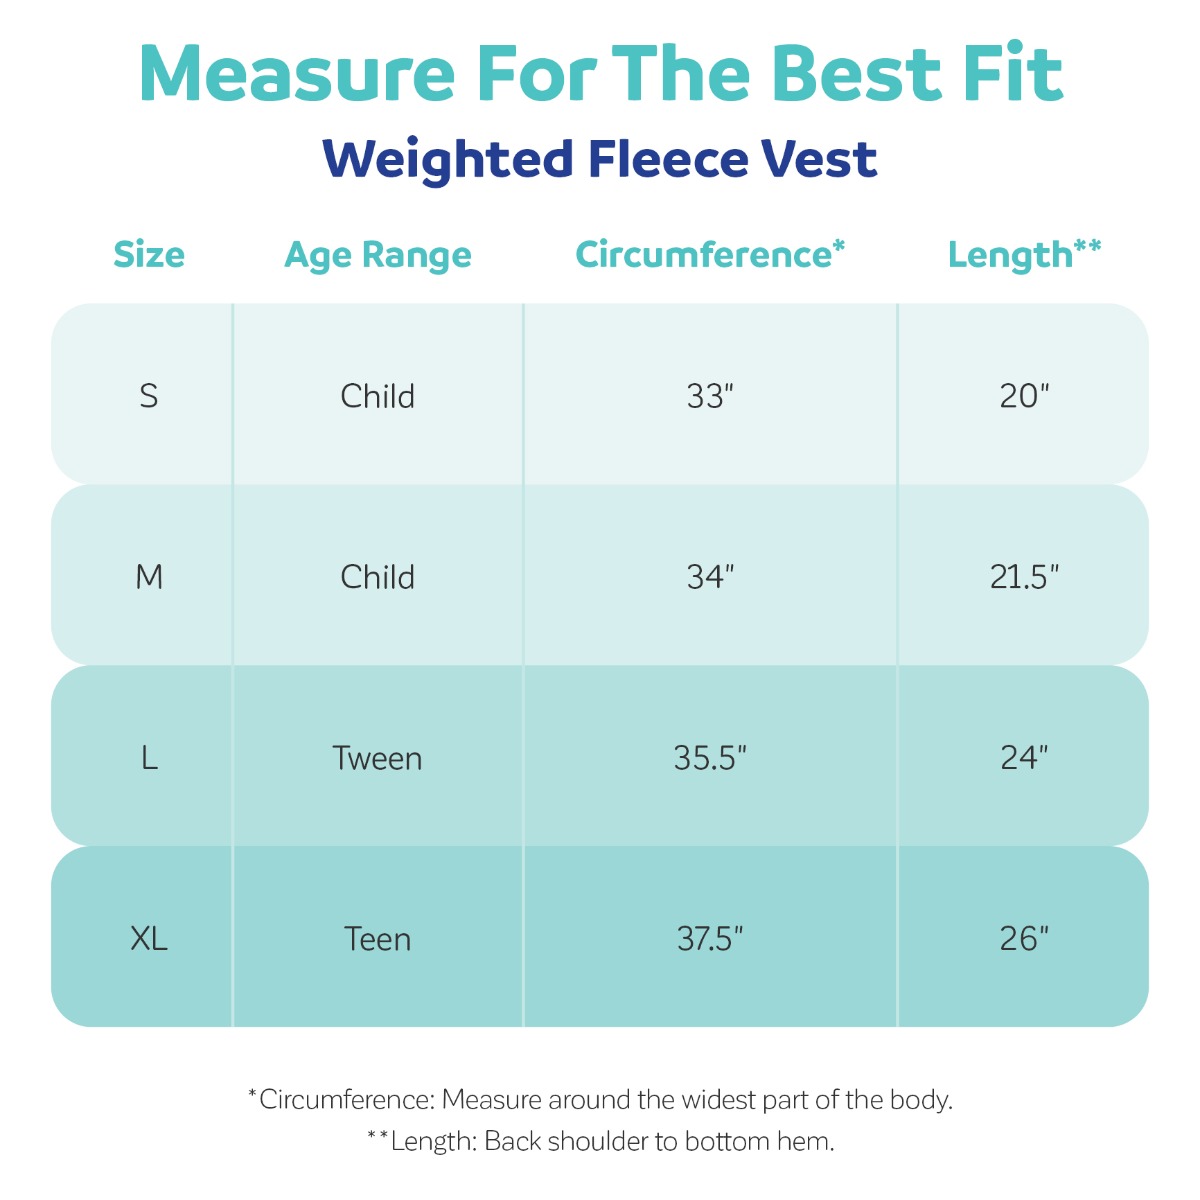 Weighted_Fleece_Vest_web_size_chart